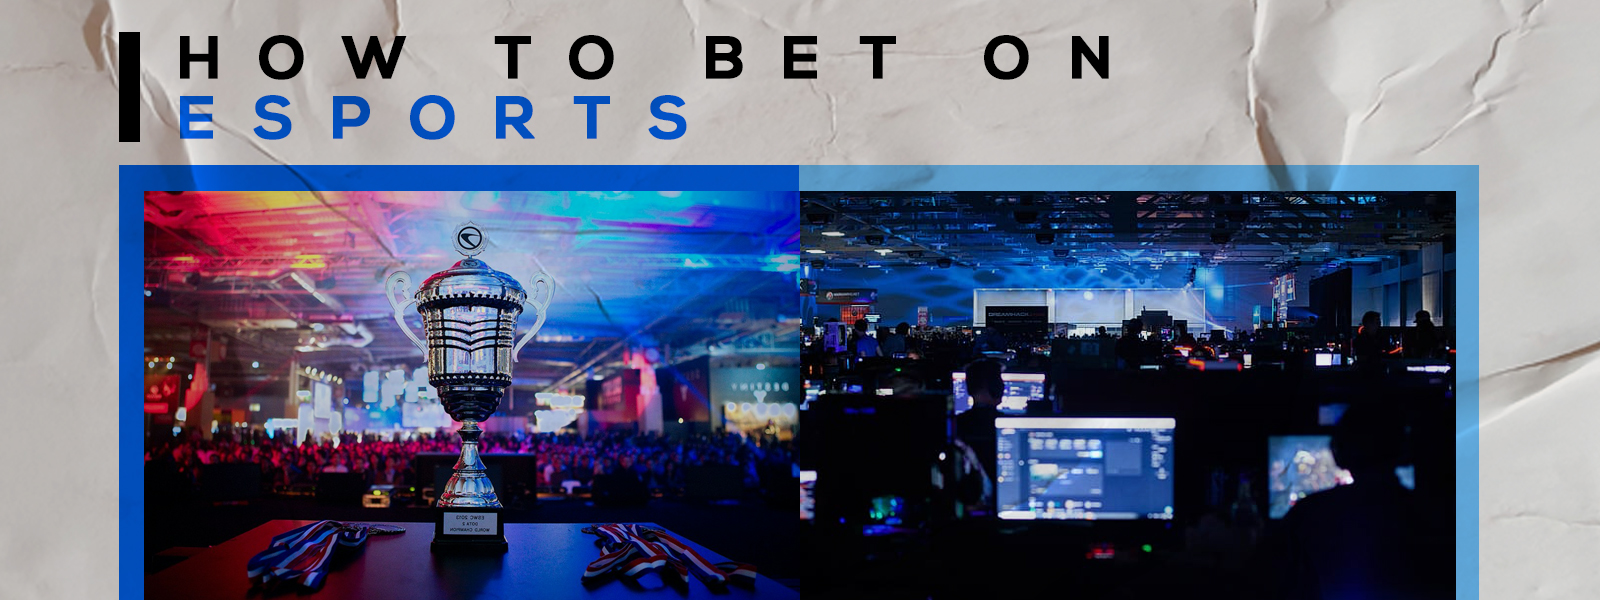 Learn How To Bet On Esports